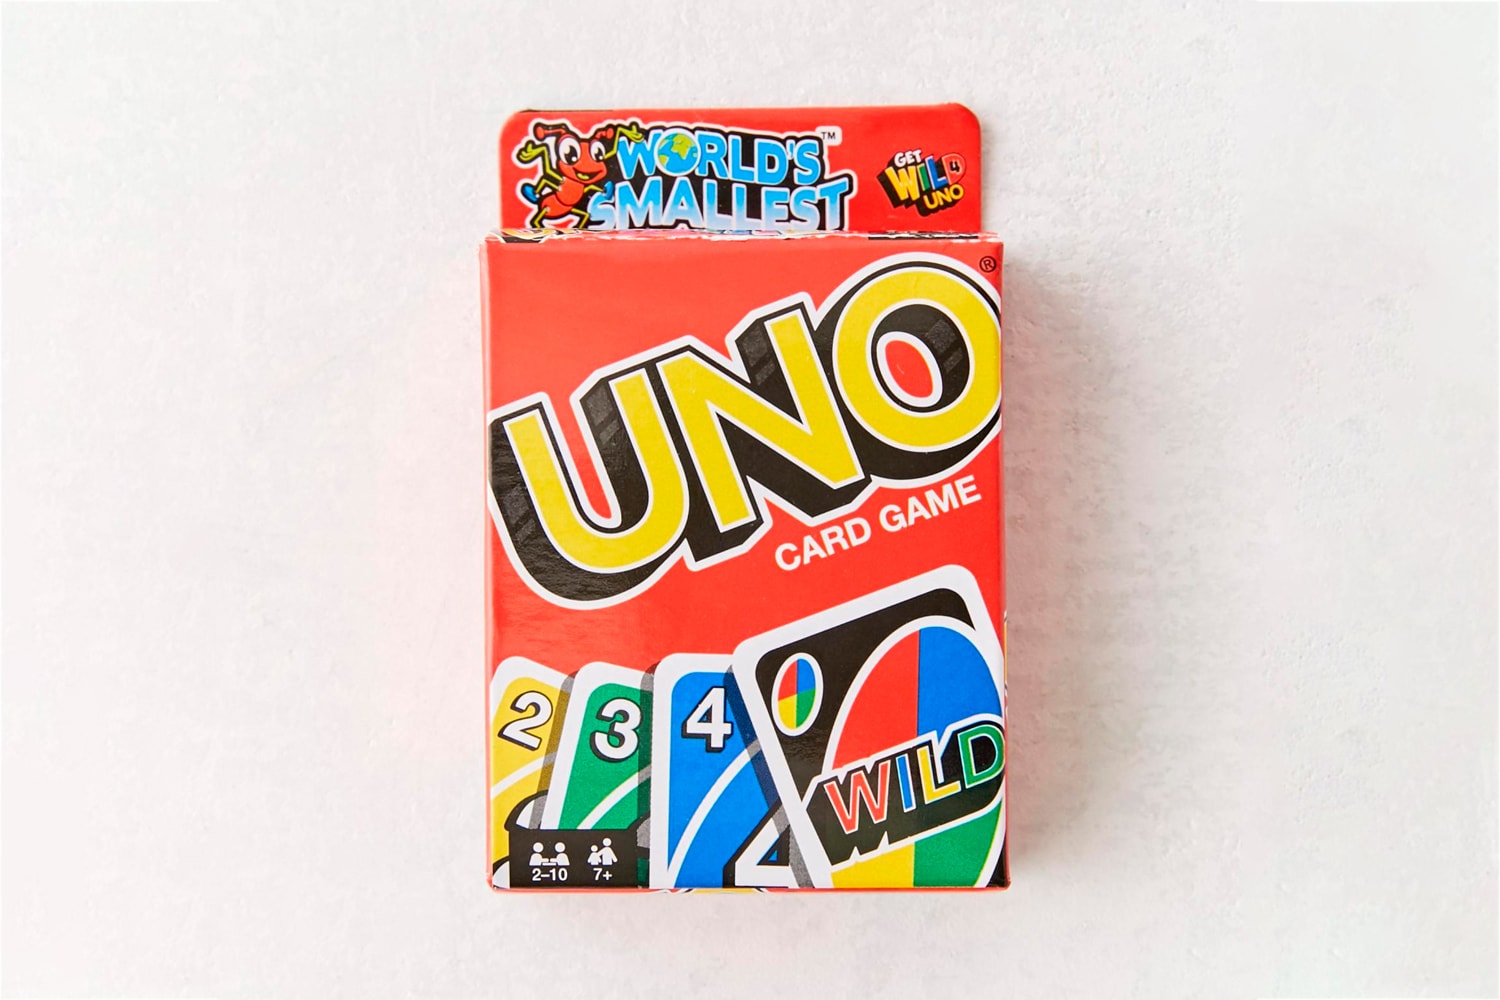 Check Out the World's Smallest Uno Game